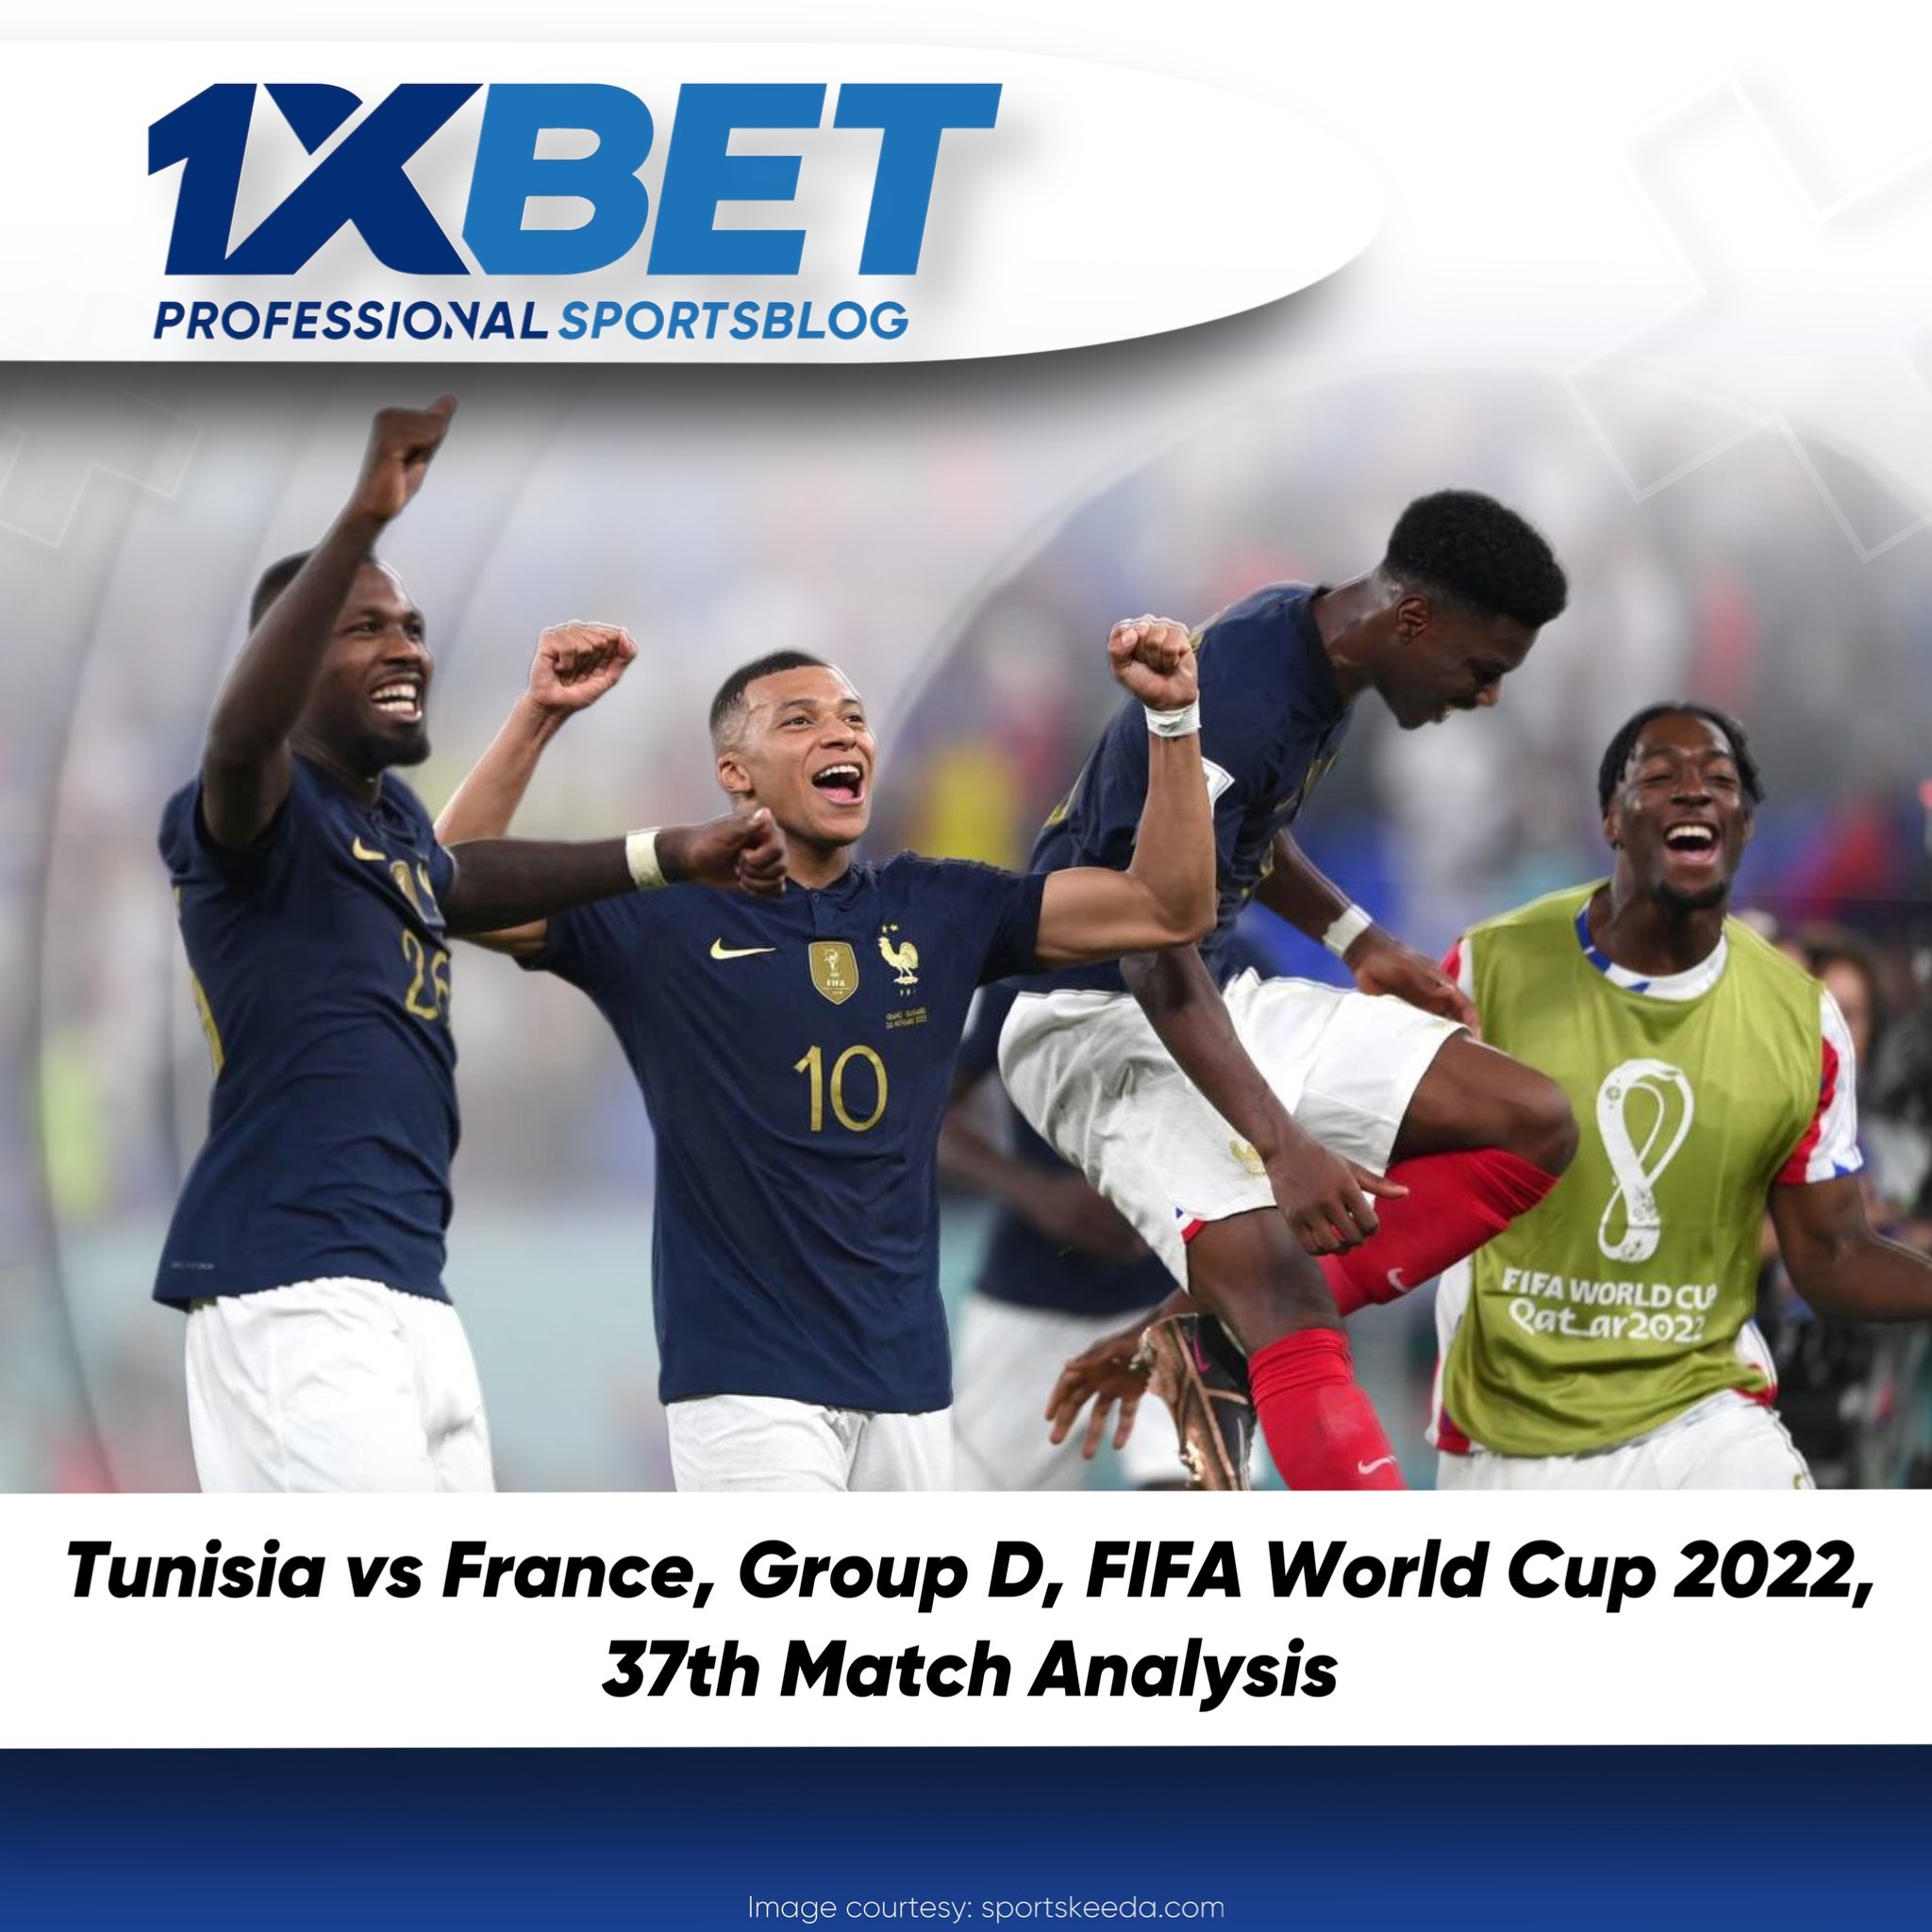 Tunisia vs France, Group D, FIFA World Cup 2022, 37th Match Analysis